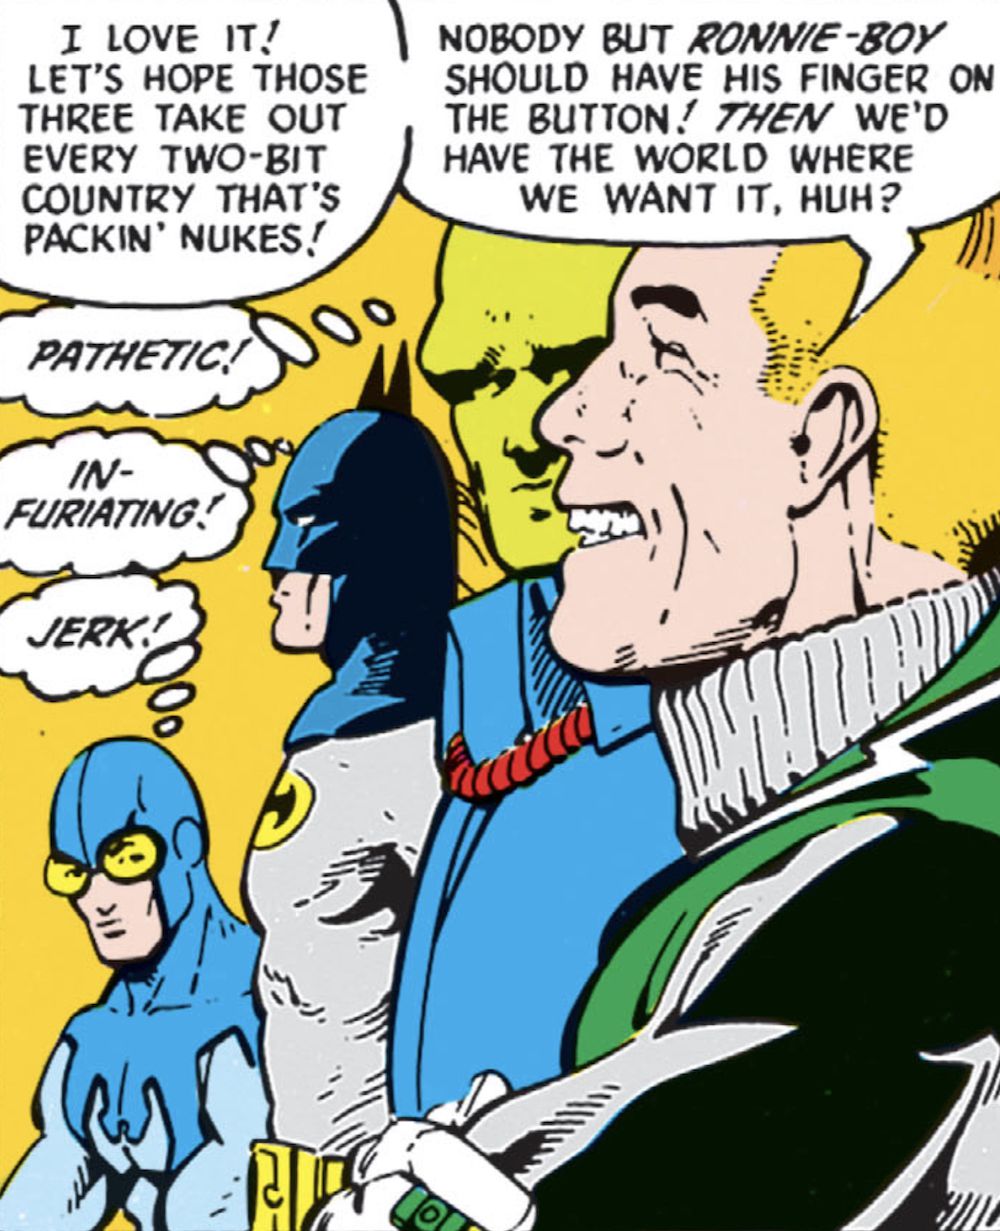 “Nobody but Ronnie-boy should have his finger on the [nuclear] button! Then we’d have the world where we want it, huh?” says Guy Gardner, grinning. “Pathetic,” thinks the Martian Manhunter. “Infuriating,” thinks Batman. “Jerk!” thinks Blue Beetle. 